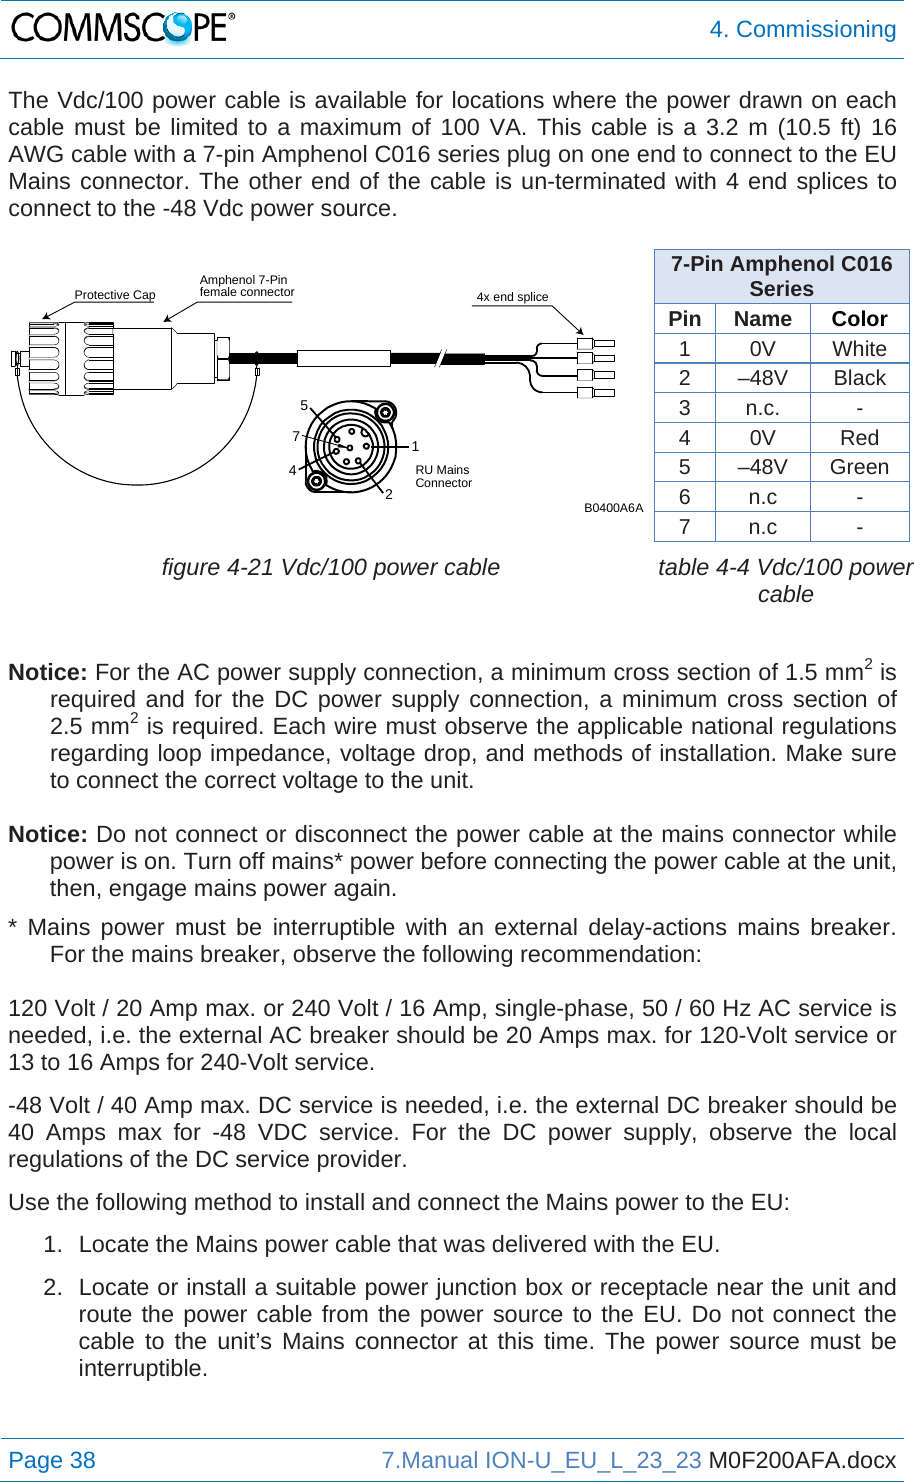  4. Commissioning Page 38  7.Manual ION-U_EU_L_23_23 M0F200AFA.docx  The Vdc/100 power cable is available for locations where the power drawn on each cable must be limited to a maximum of 100 VA. This cable is a 3.2 m (10.5 ft) 16 AWG cable with a 7-pin Amphenol C016 series plug on one end to connect to the EU Mains connector. The other end of the cable is un-terminated with 4 end splices to connect to the -48 Vdc power source.   7-Pin Amphenol C016 Series Pin Name  Color 1 0V White 2 –48V Black 3 n.c.  - 4 0V  Red 5 –48V Green 6 n.c  - 7 n.c  -  figure 4-21 Vdc/100 power cable  table 4-4 Vdc/100 power cable  Notice: For the AC power supply connection, a minimum cross section of 1.5 mm2 is required and for the DC power supply connection, a minimum cross section of 2.5 mm2 is required. Each wire must observe the applicable national regulations regarding loop impedance, voltage drop, and methods of installation. Make sure to connect the correct voltage to the unit.  Notice: Do not connect or disconnect the power cable at the mains connector while power is on. Turn off mains* power before connecting the power cable at the unit, then, engage mains power again. * Mains power must be interruptible with an external delay-actions mains breaker. For the mains breaker, observe the following recommendation:  120 Volt / 20 Amp max. or 240 Volt / 16 Amp, single-phase, 50 / 60 Hz AC service is needed, i.e. the external AC breaker should be 20 Amps max. for 120-Volt service or 13 to 16 Amps for 240-Volt service. -48 Volt / 40 Amp max. DC service is needed, i.e. the external DC breaker should be 40 Amps max for -48 VDC service. For the DC power supply, observe the local regulations of the DC service provider. Use the following method to install and connect the Mains power to the EU: 1.  Locate the Mains power cable that was delivered with the EU. 2.  Locate or install a suitable power junction box or receptacle near the unit and route the power cable from the power source to the EU. Do not connect the cable to the unit’s Mains connector at this time. The power source must be interruptible.   12457Amphenol 7-Pinfemale connectorProtective Cap 4x end spliceB0400A6ARU MainsConnector